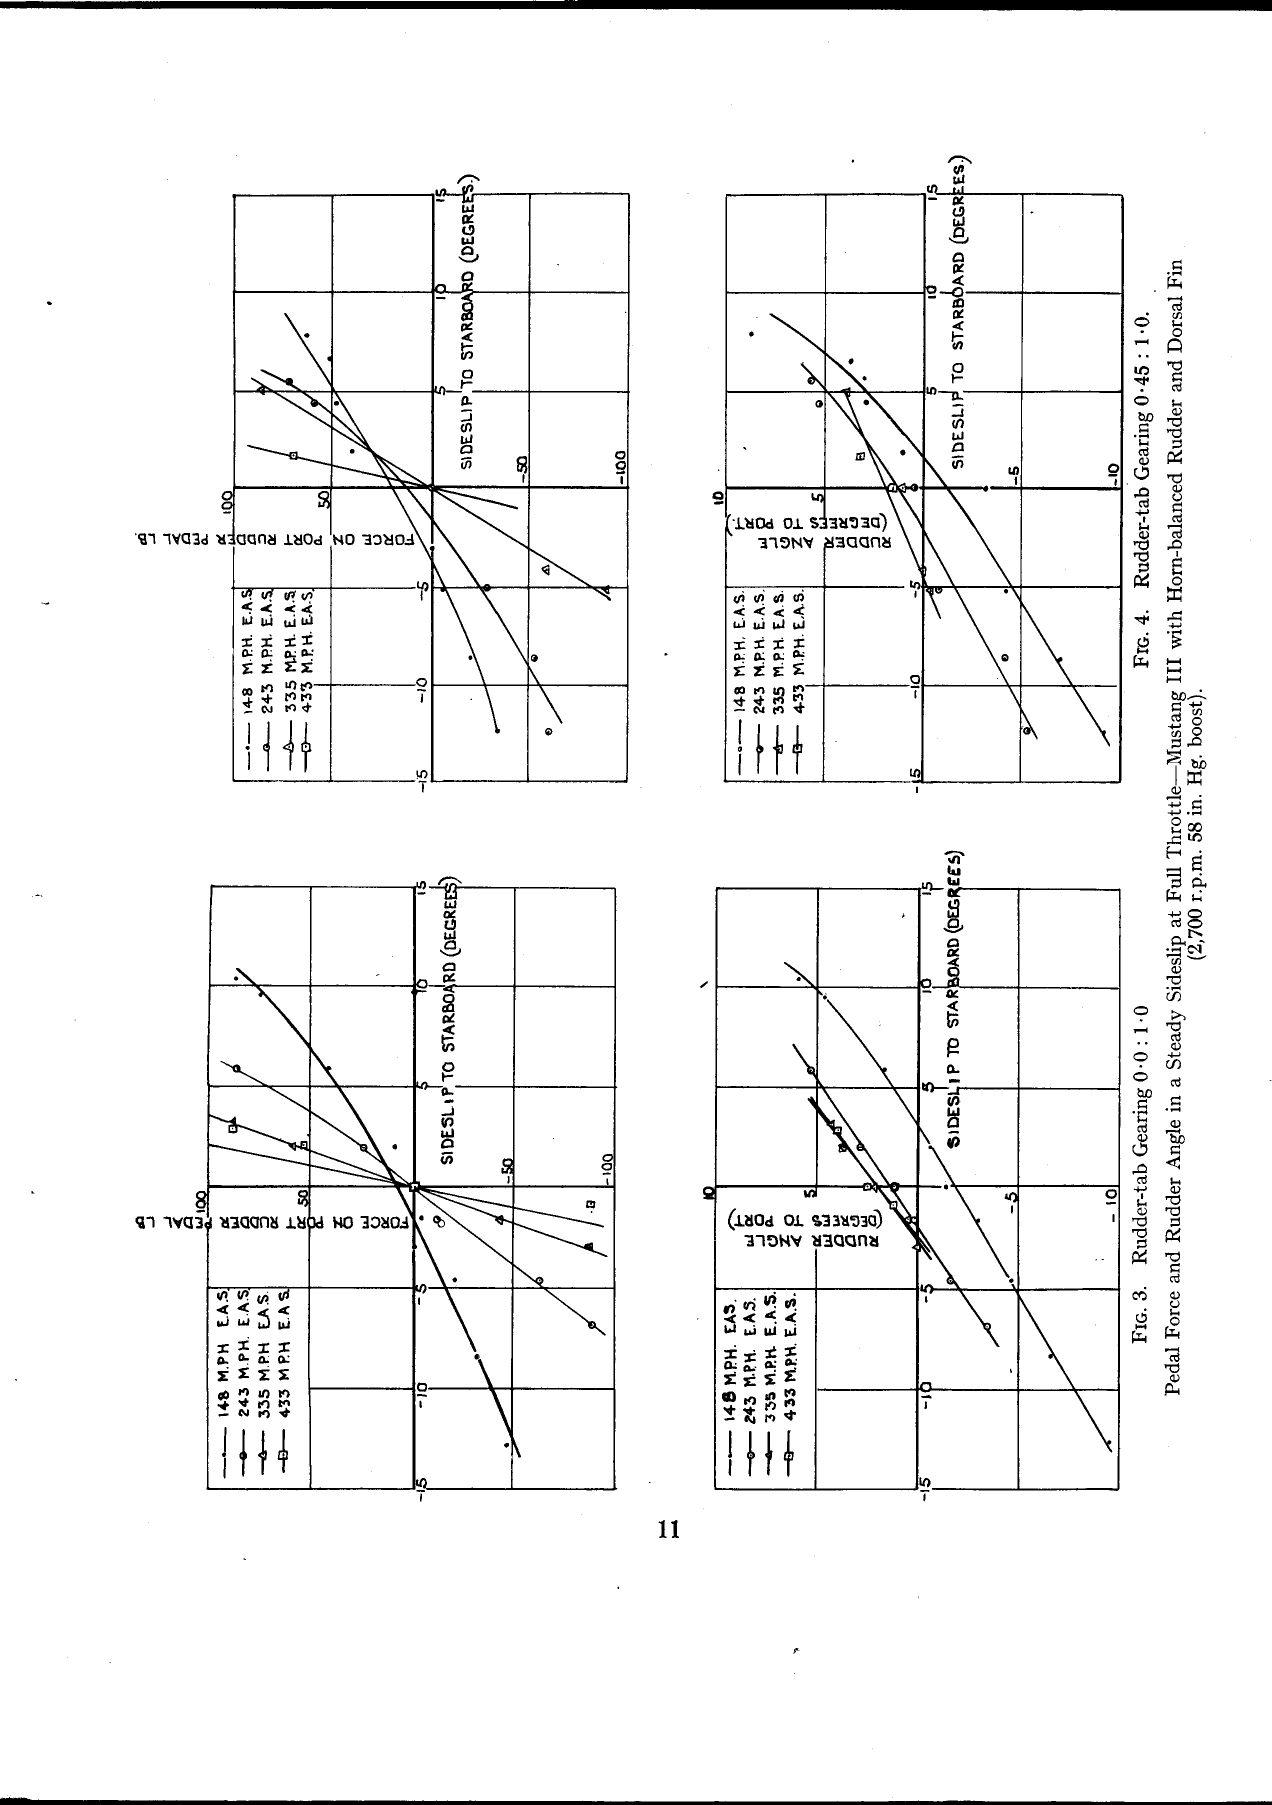 Sample page 11 from AirCorps Library document: Flight Measurements - Directional Stability & Trim - P-51